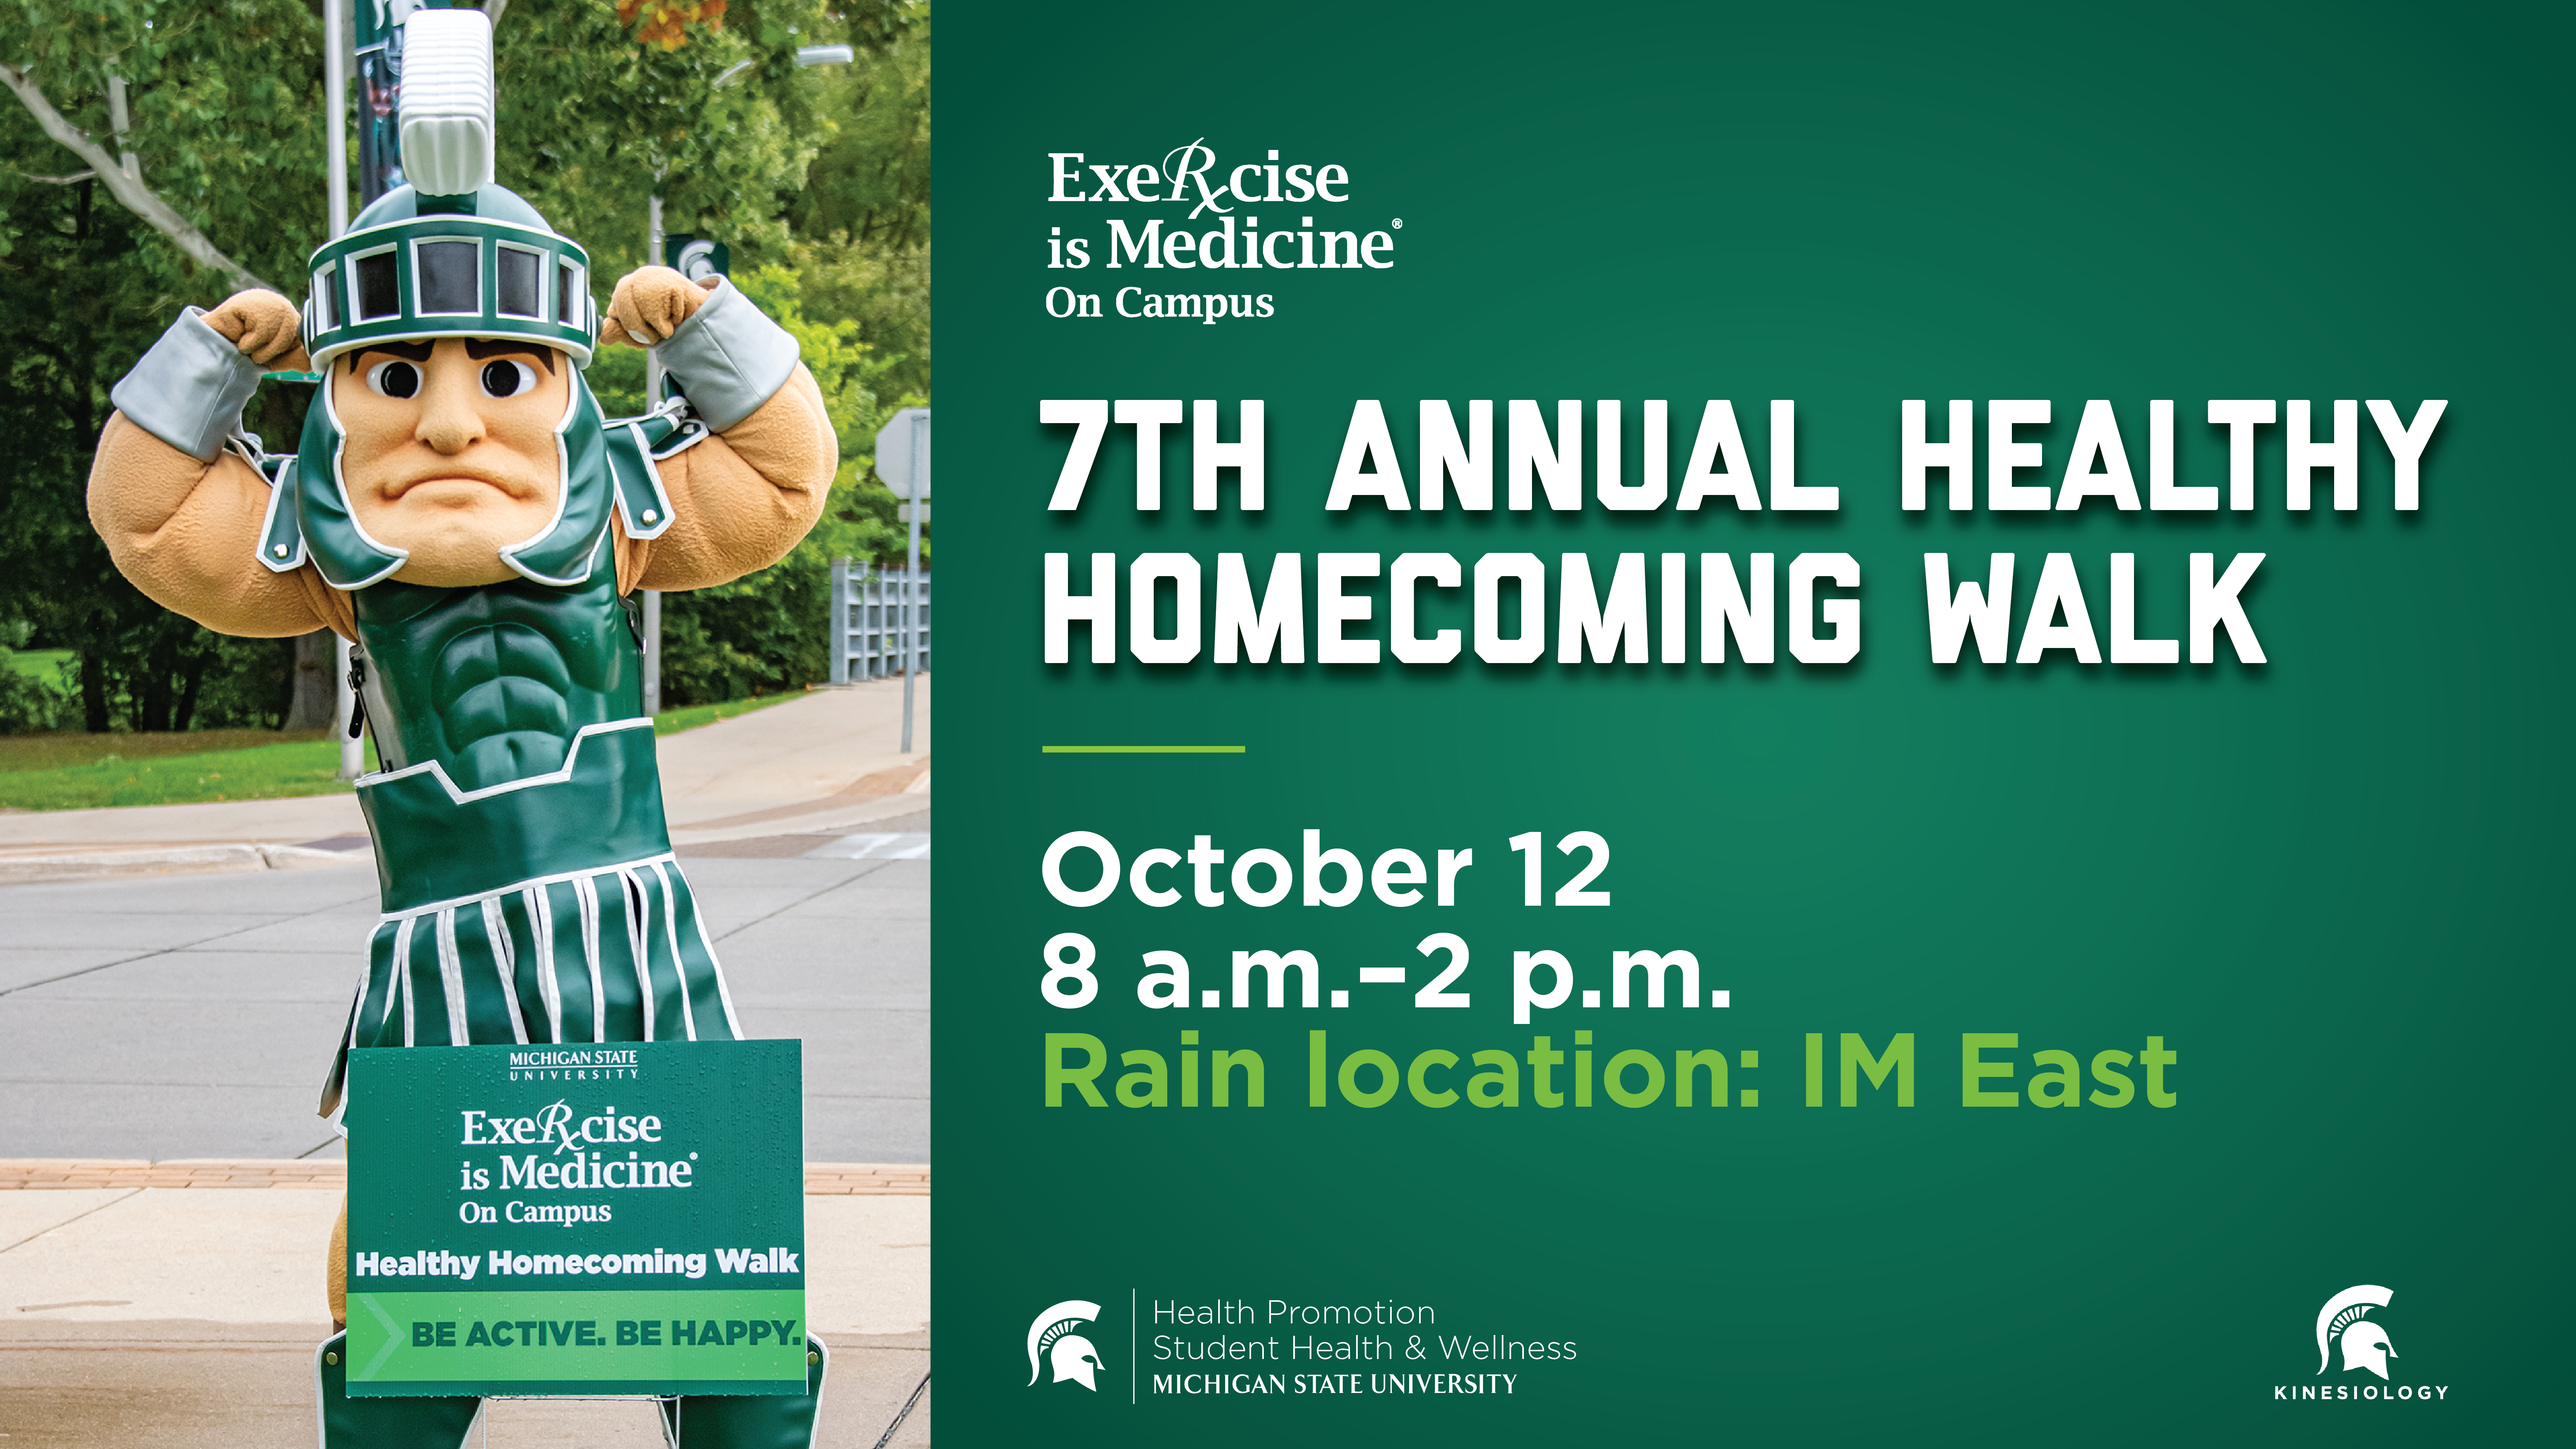 Sparty flexes his muscles on a sunny day. Text gives event details for the 7th Annual Healthy Homecoming Walk